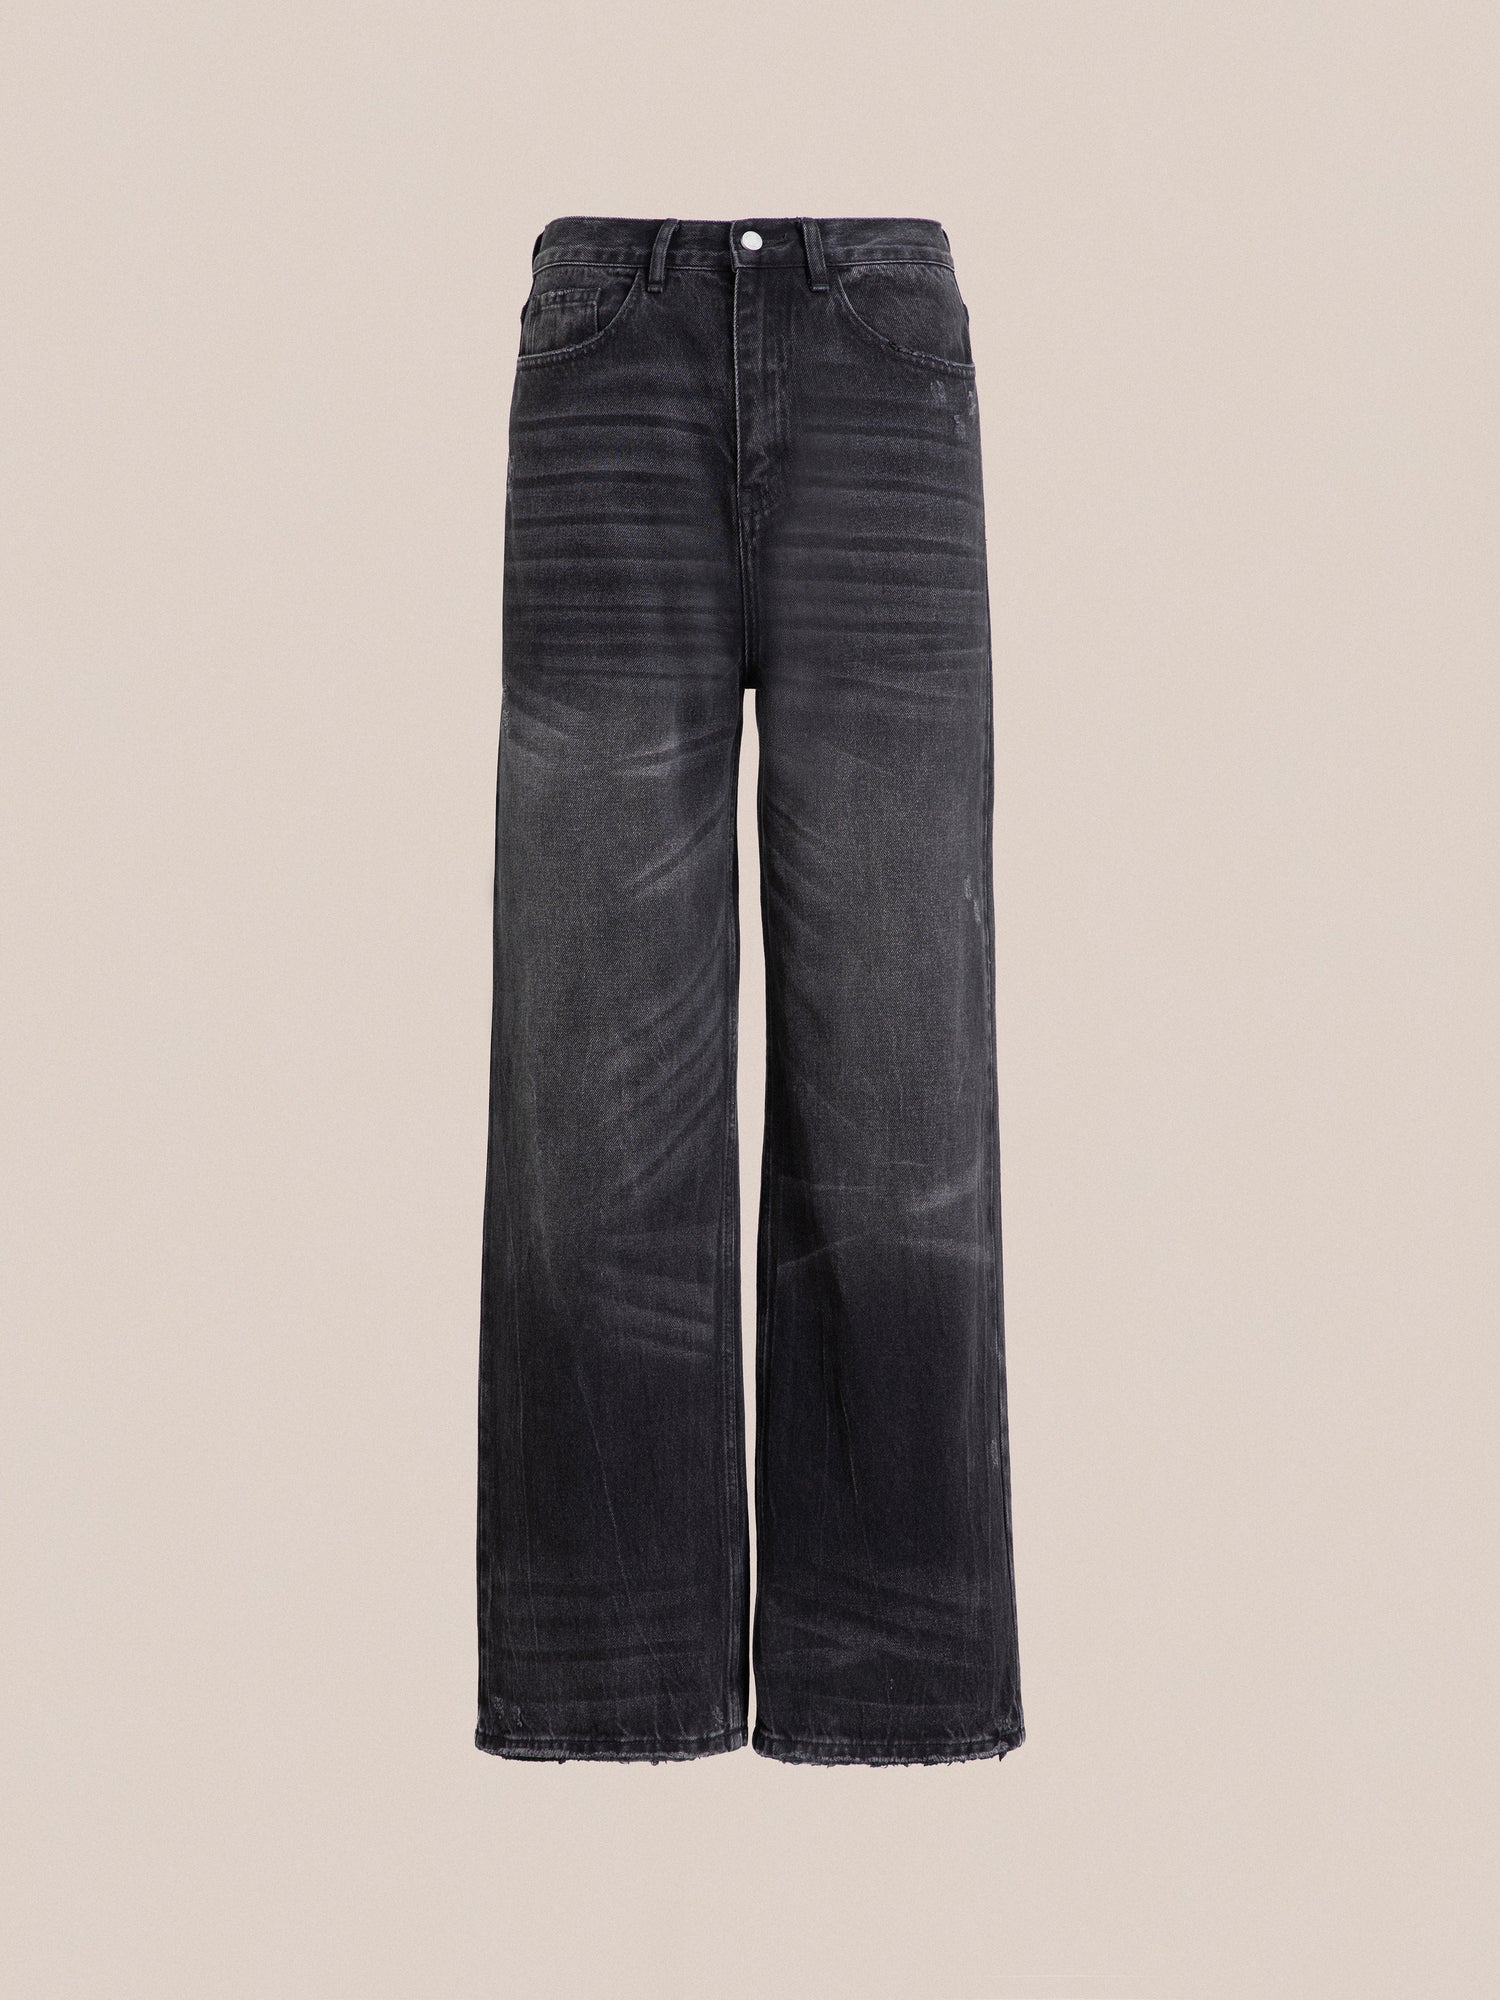 A pair of Lacy Baggy Jeans in black wash denim by Found.